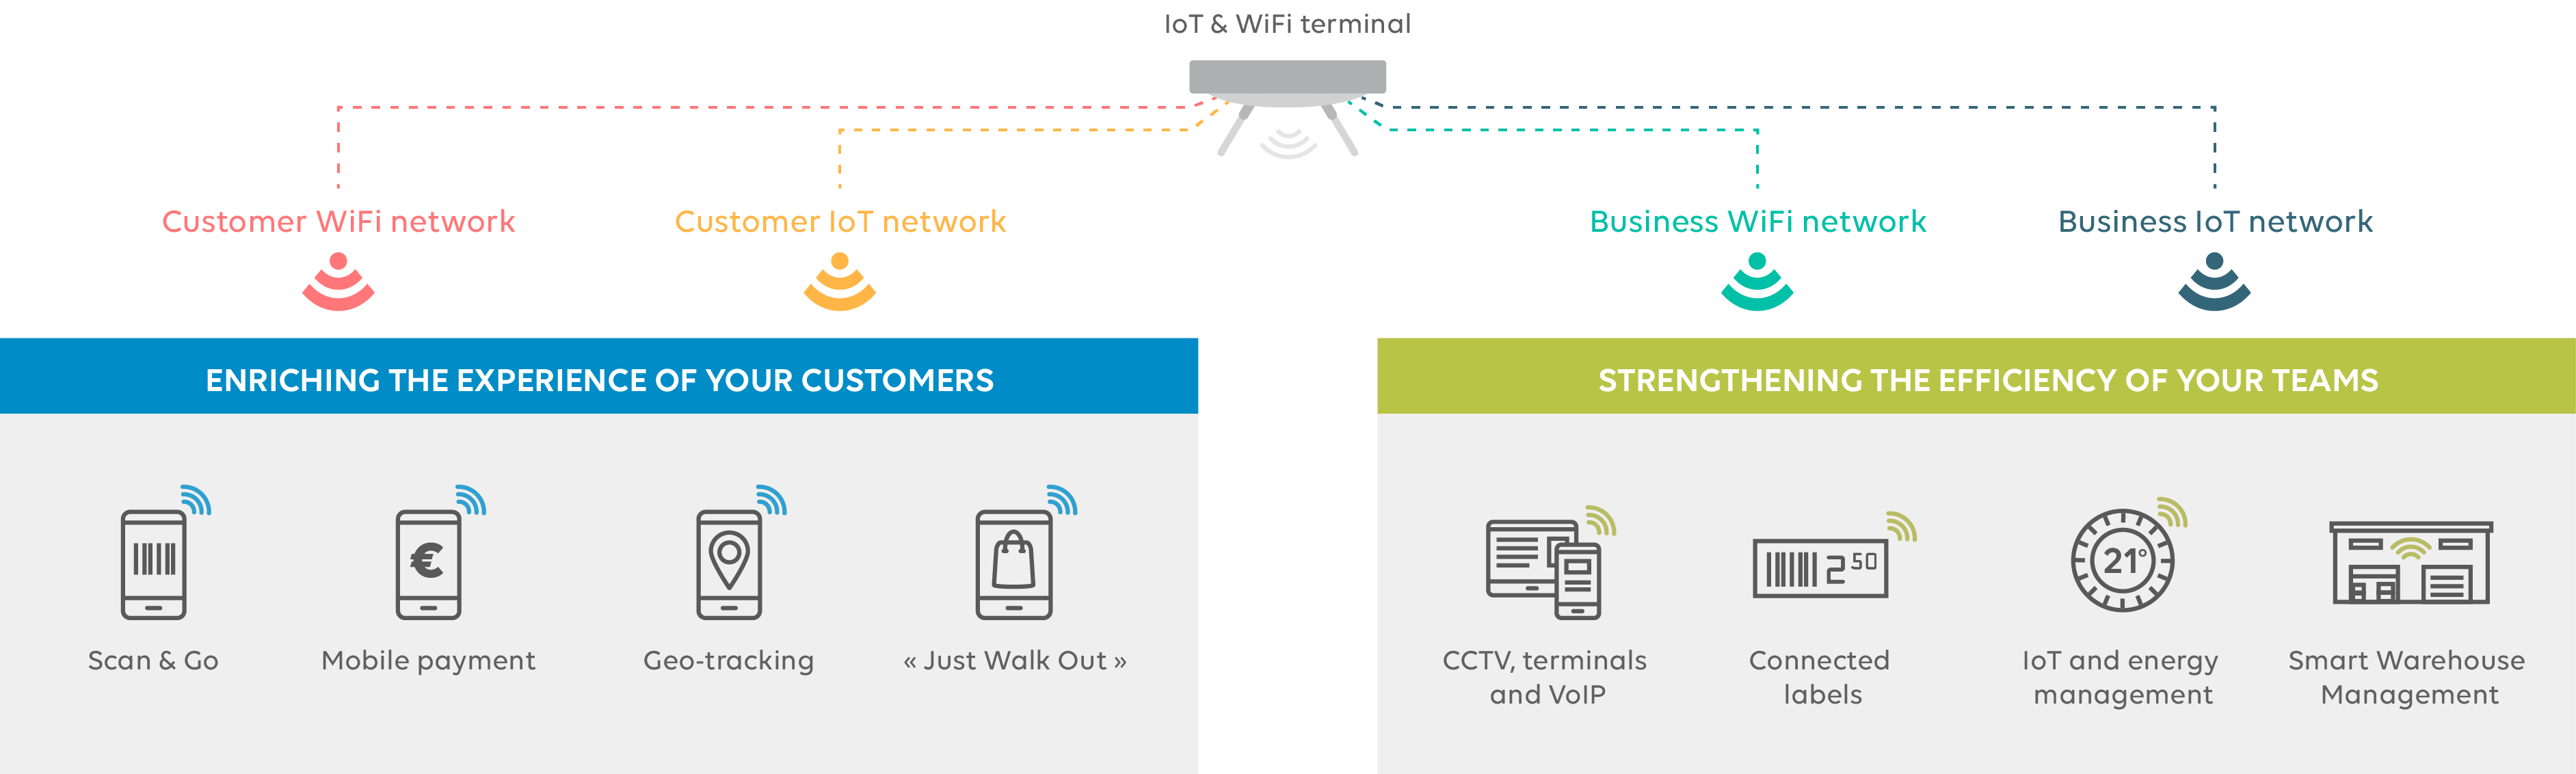 Several services for retail stores around a single wireless infrastructure 